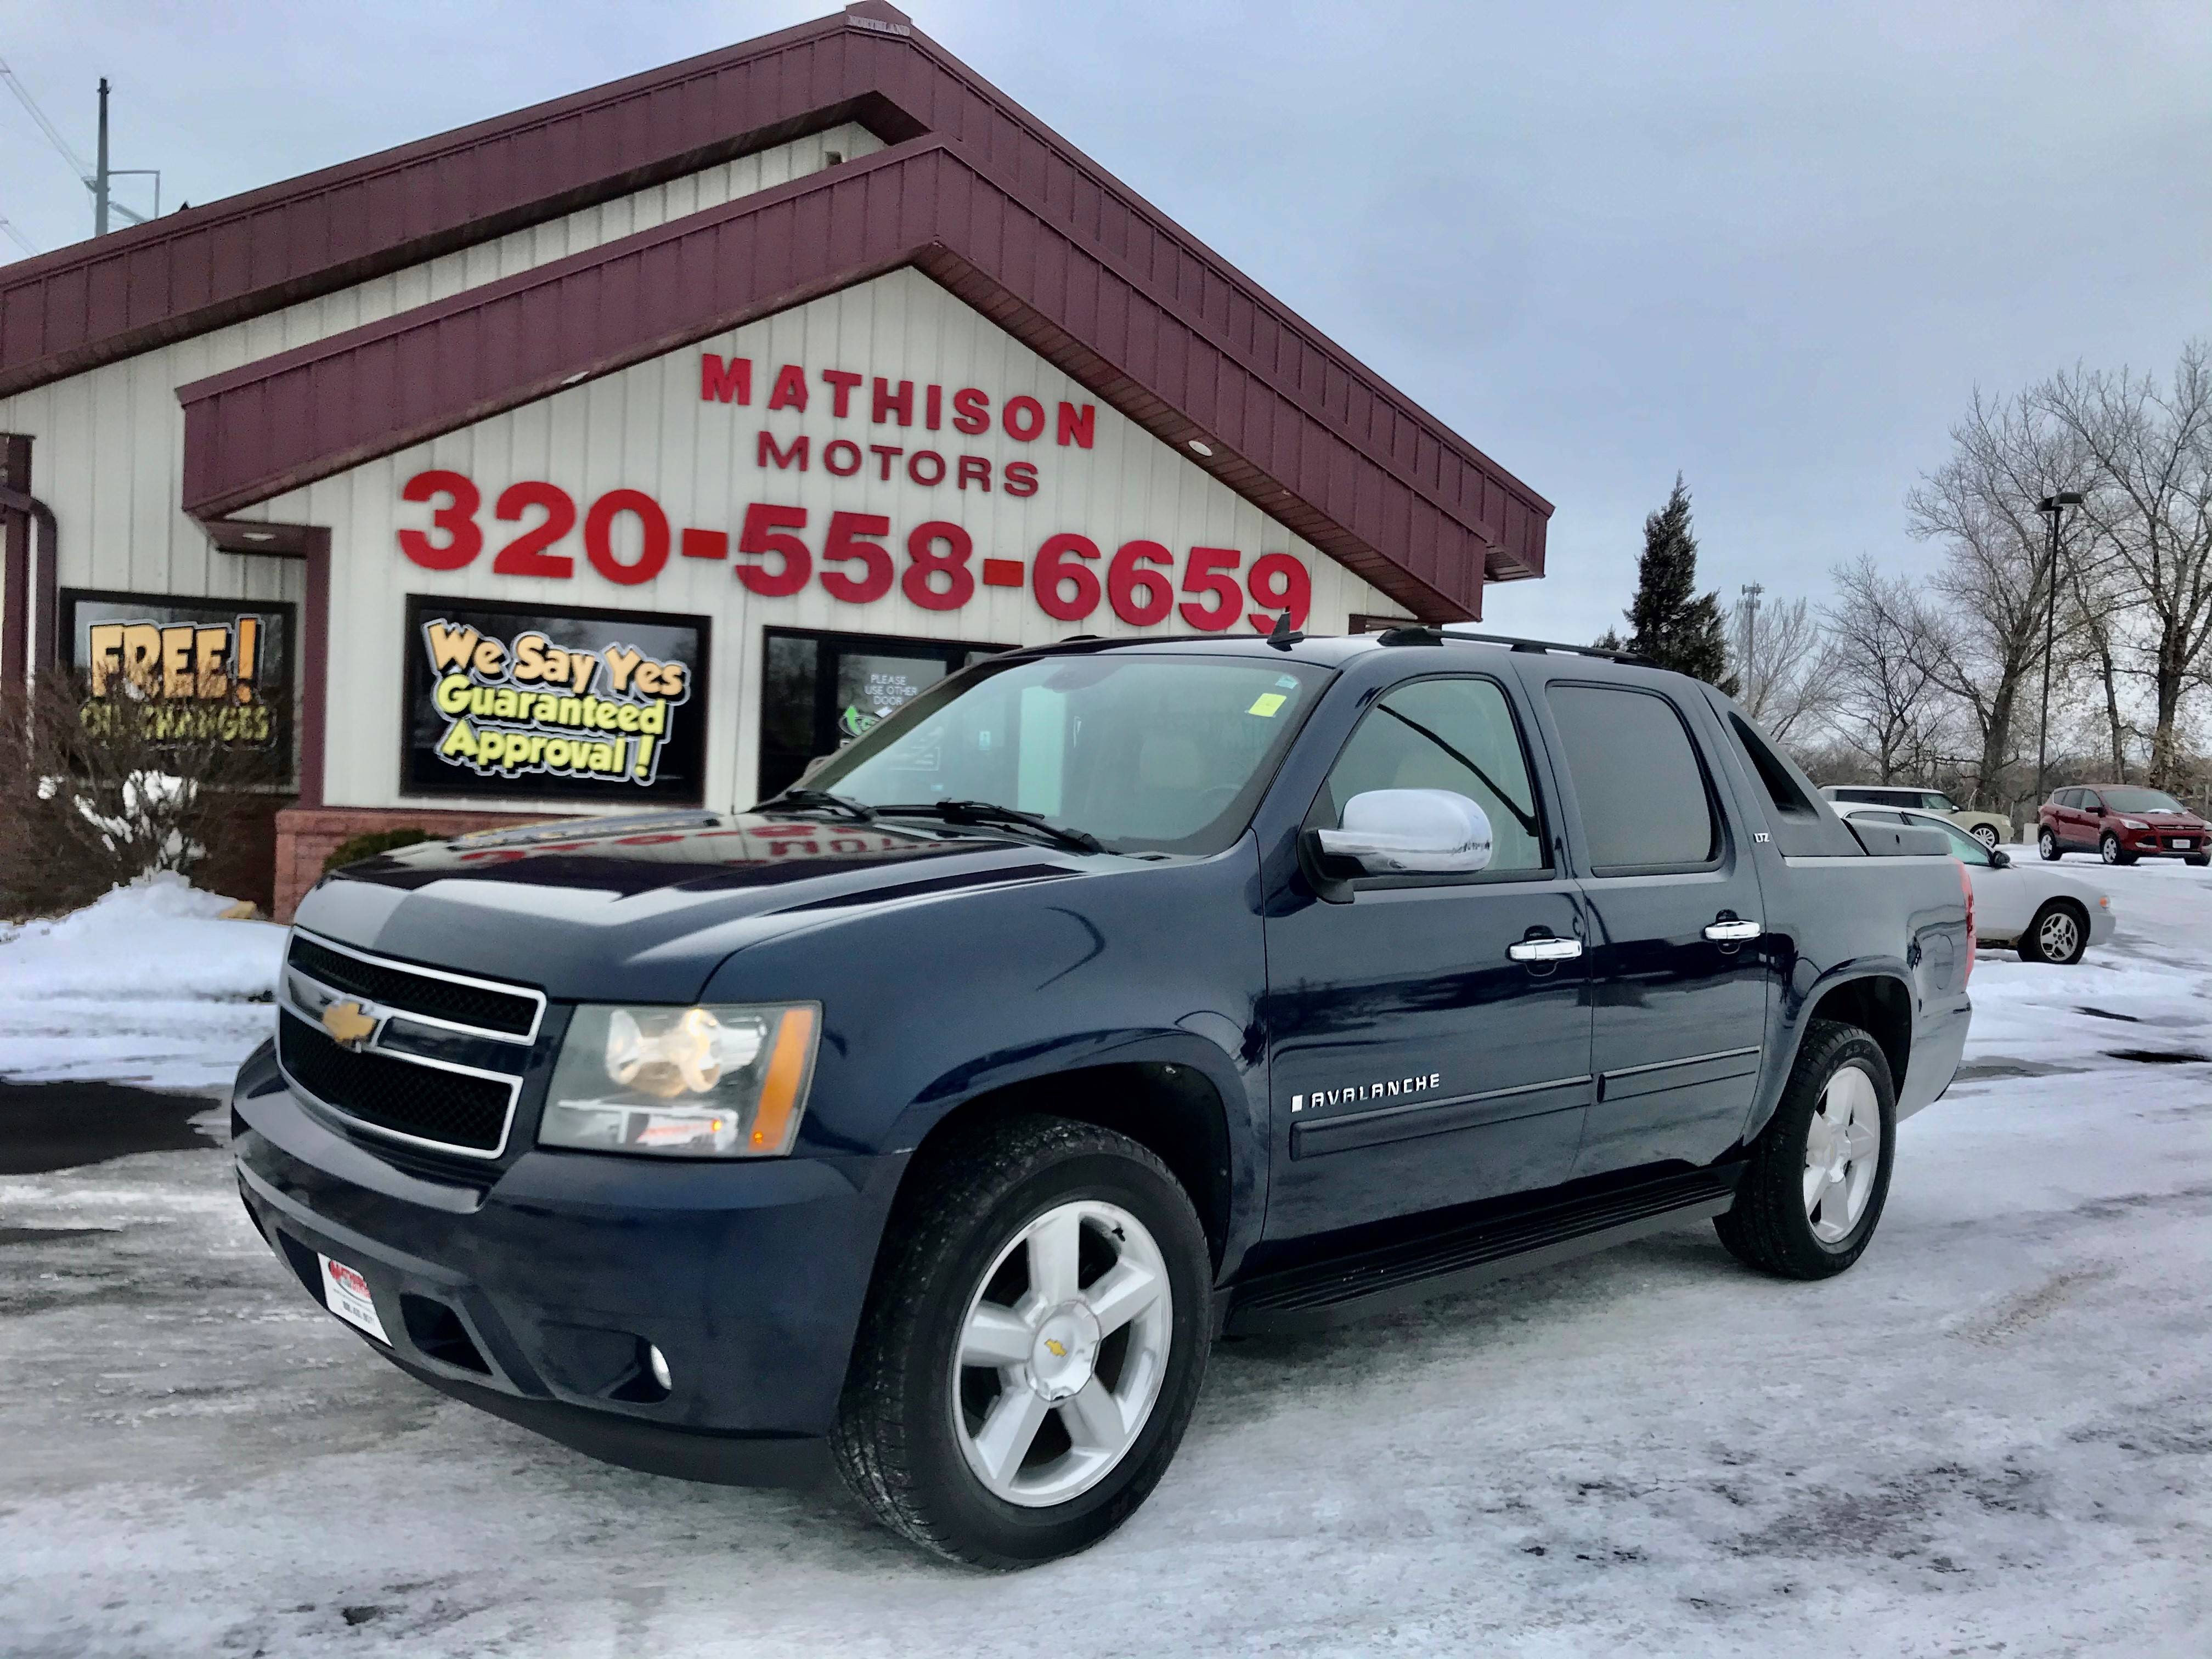 Used 2007 CHEVROLET AVALANCHE LTZ for sale in MATHISON | 22169 | JP 2007 Chevy Avalanche Pros And Cons